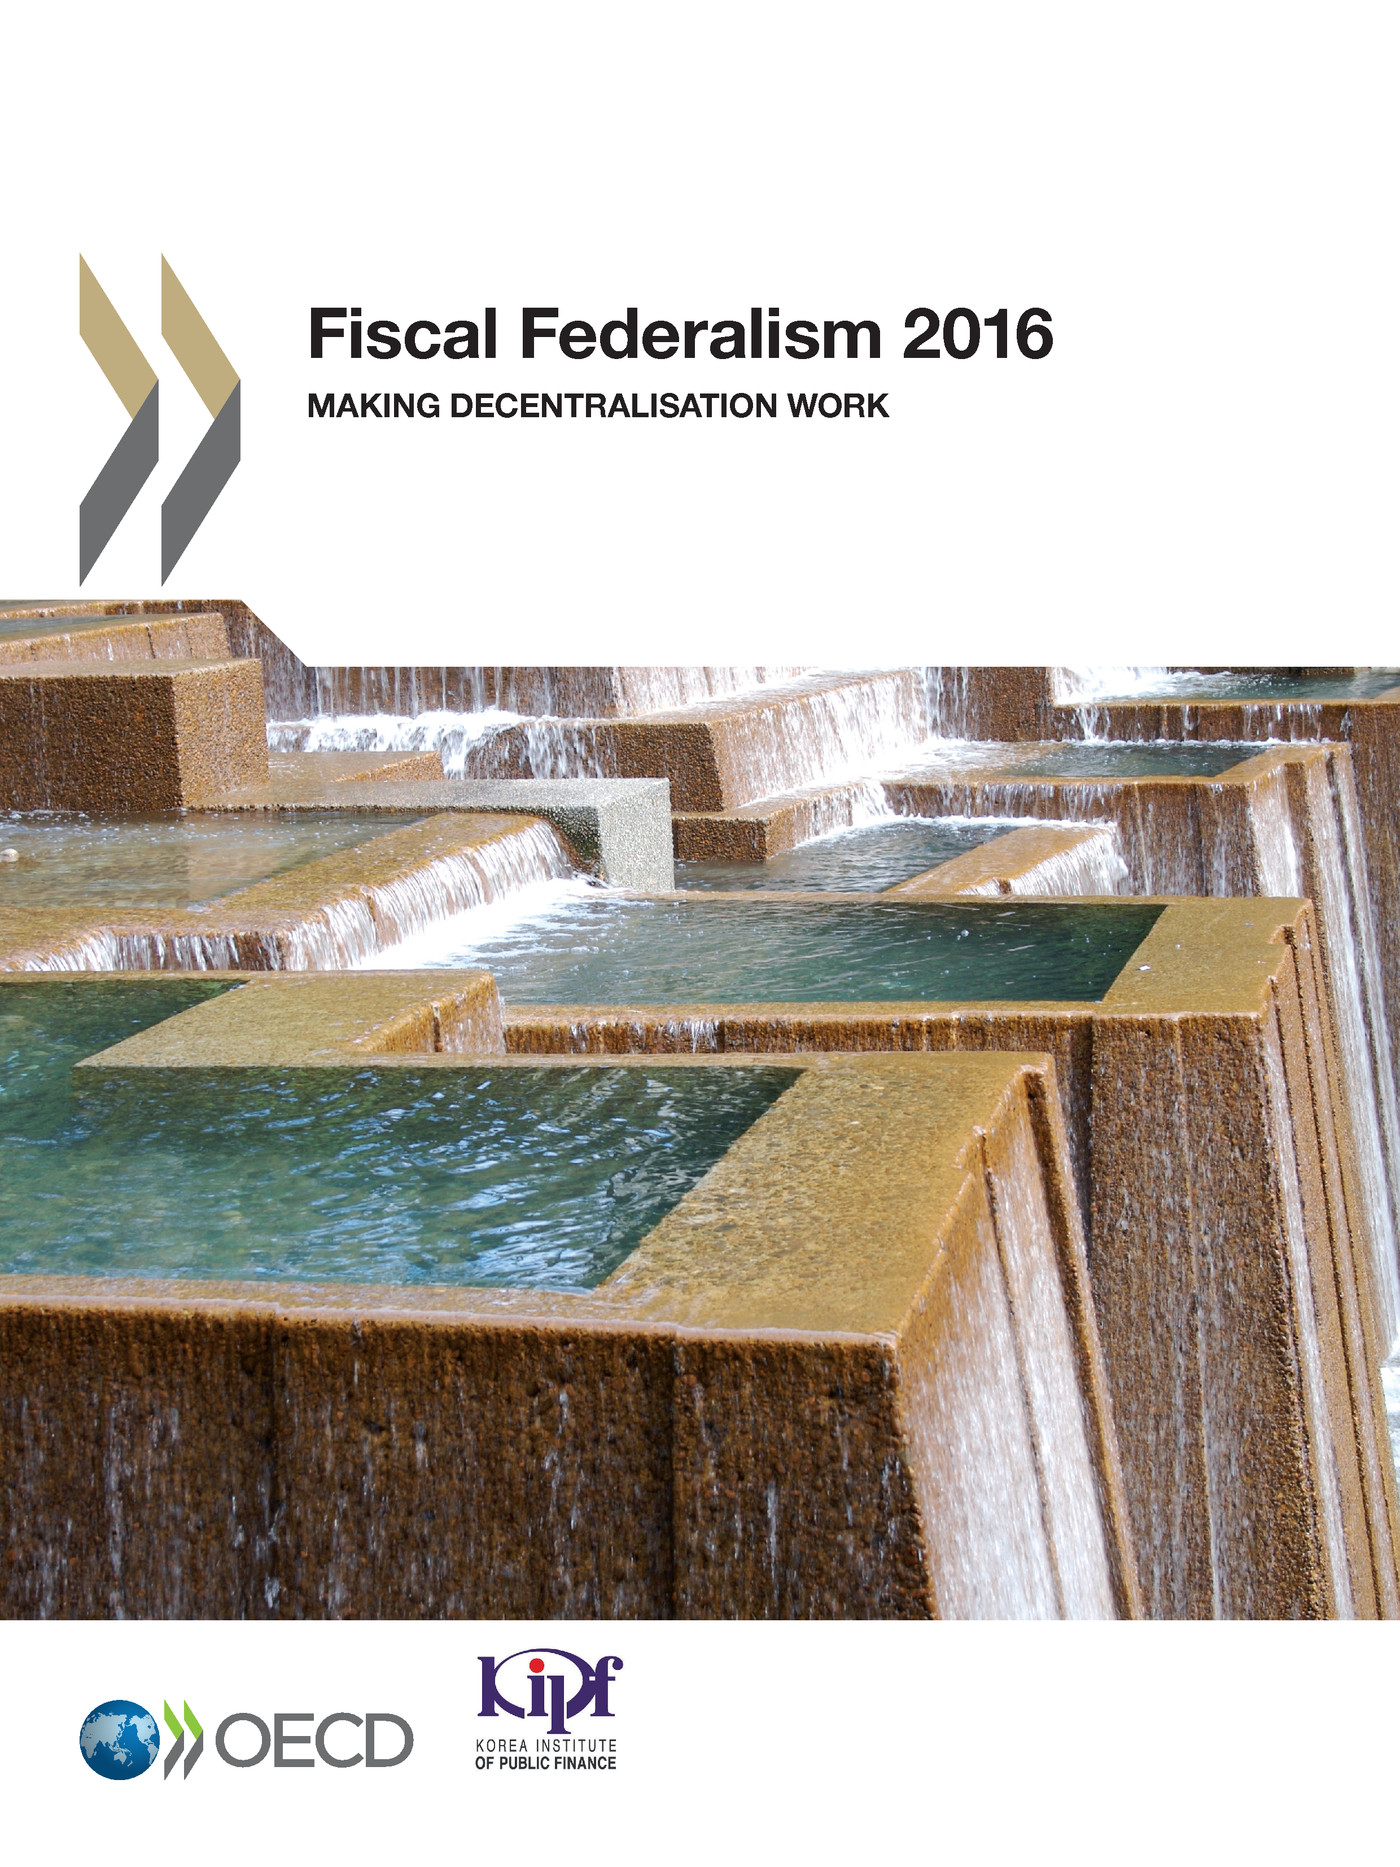 Fiscal Federalism 2016 -  Collectif - OCDE / OECD